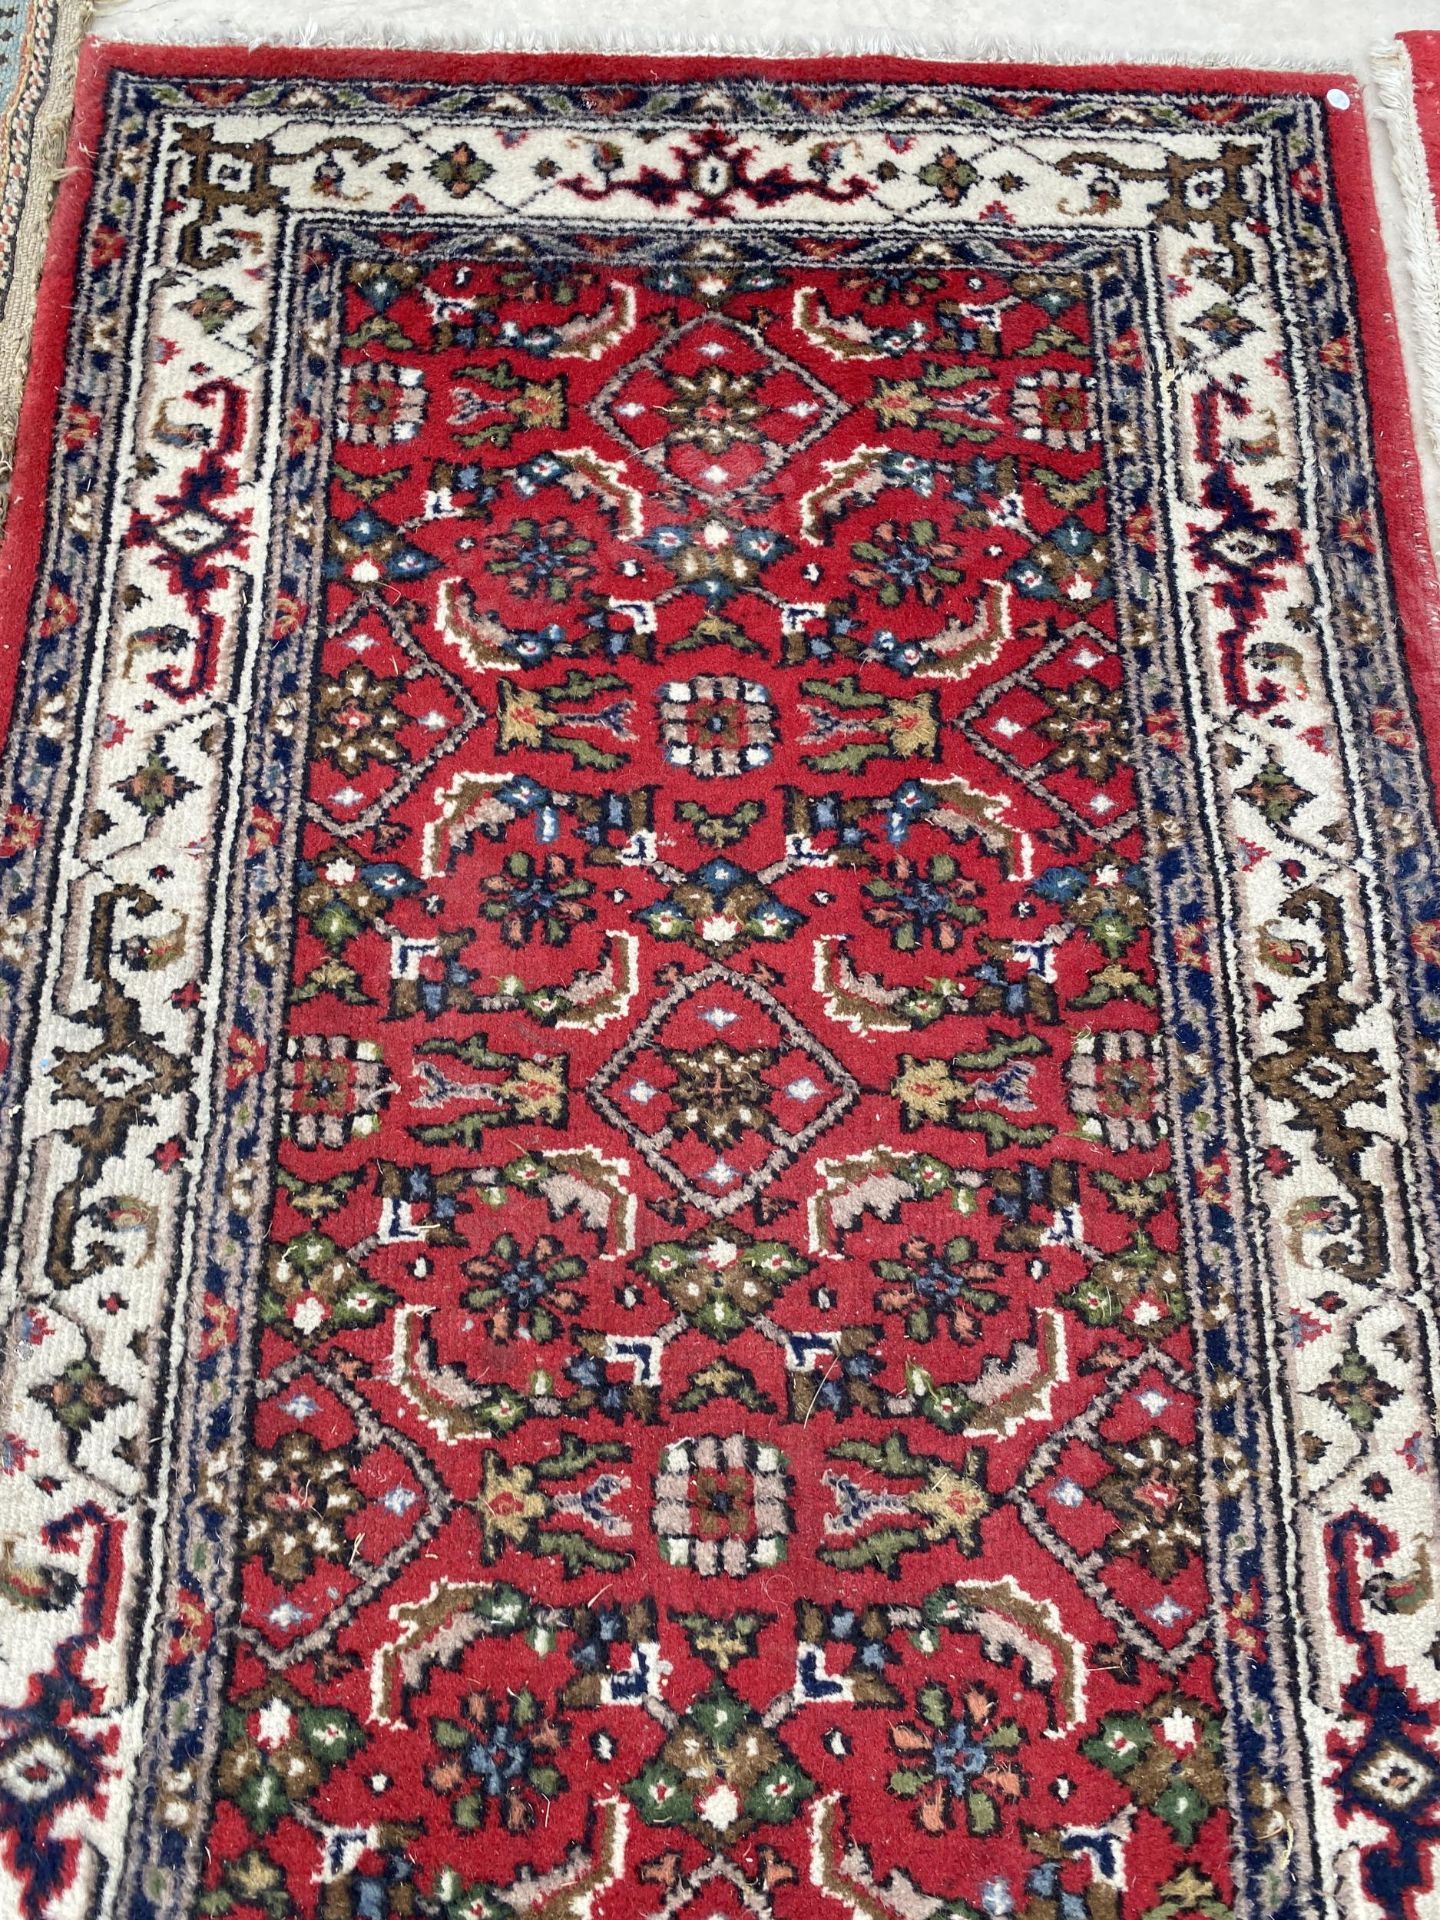 A SMALL RED PATTERNED FRINGED RUG - Image 2 of 3